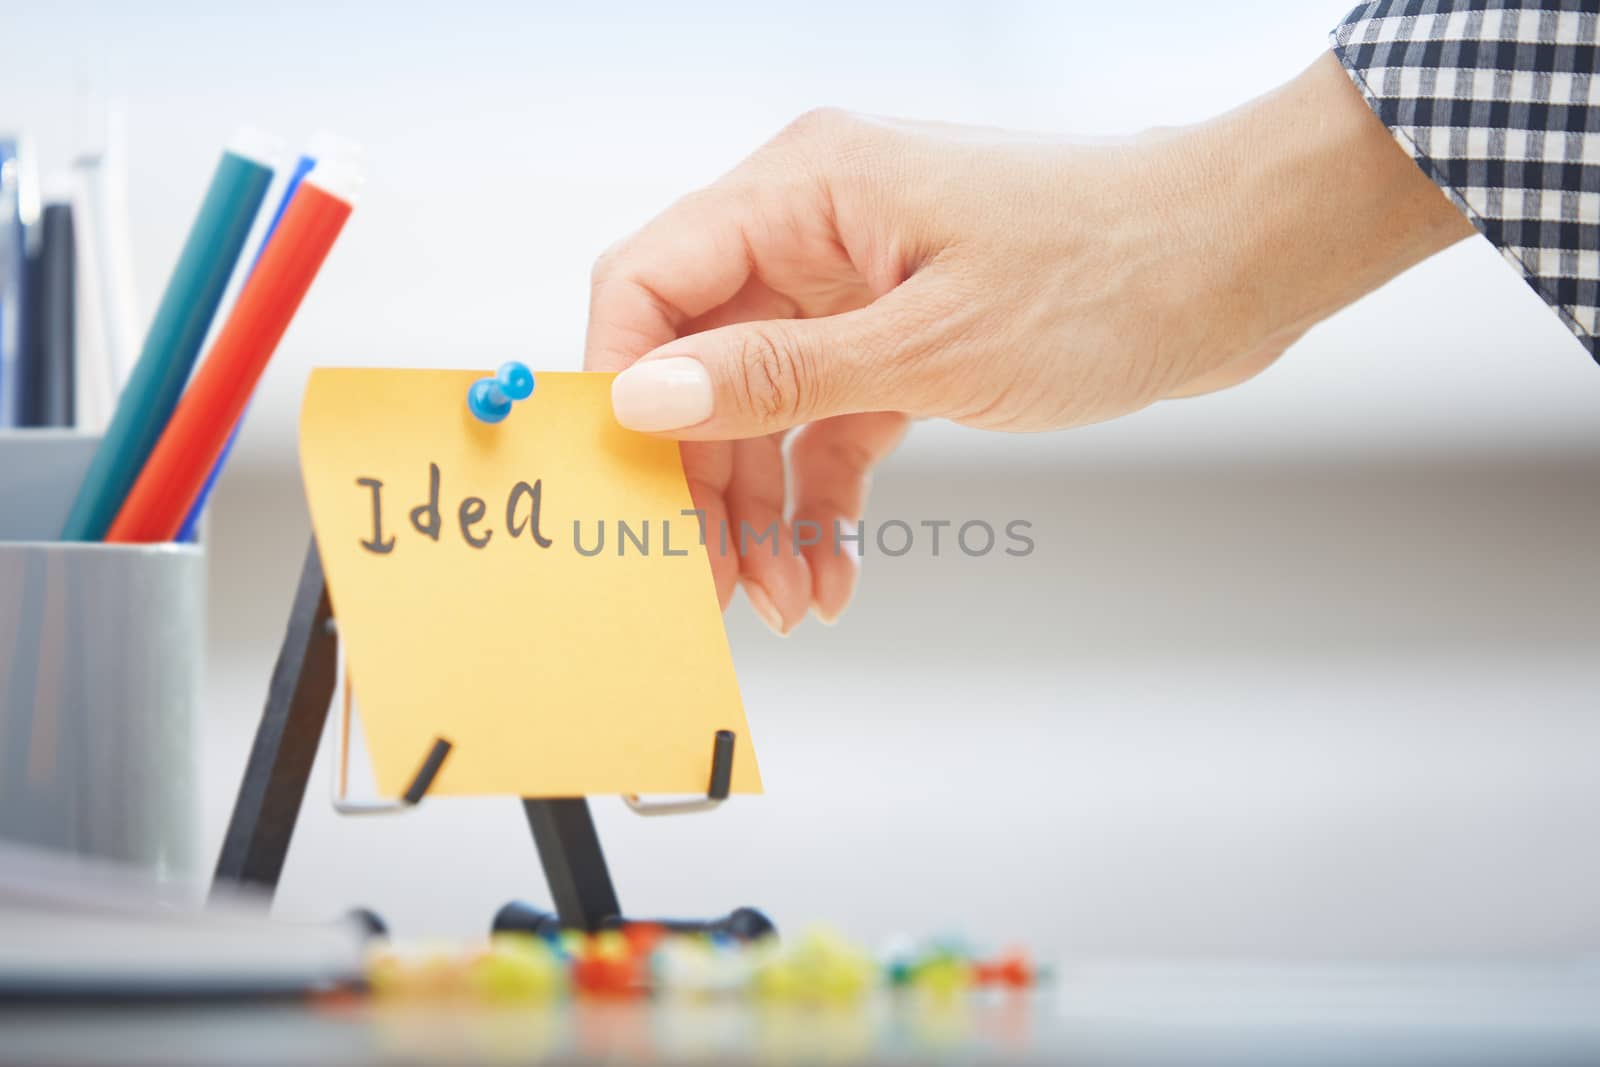 Human hand holding adhesive note with Idea text